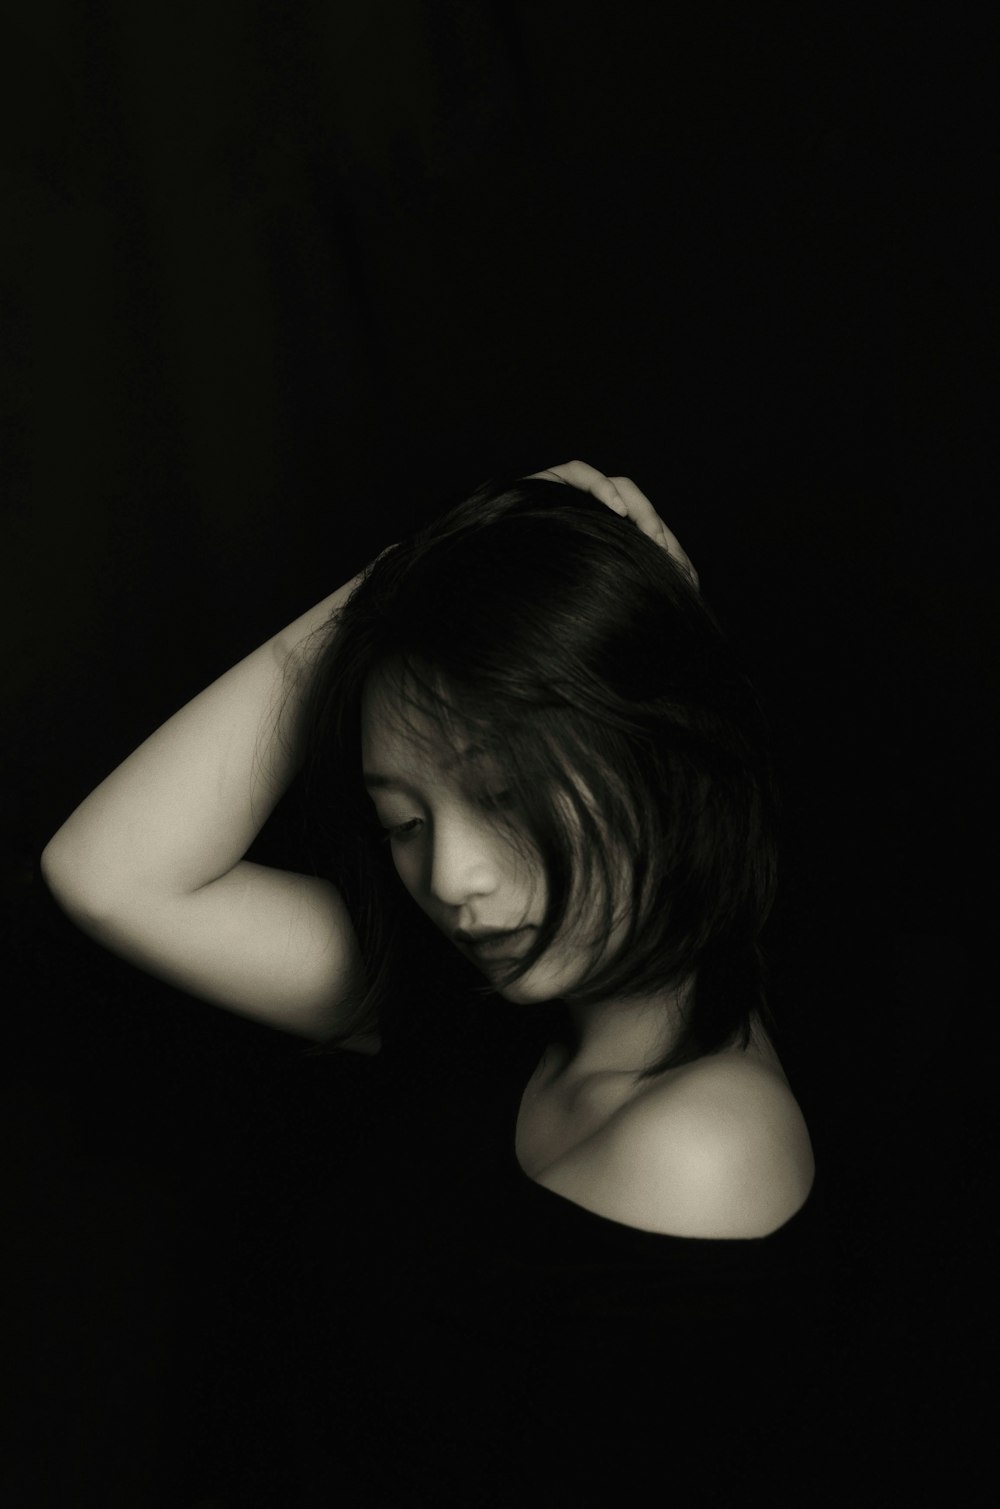 grayscale photography of woman wearing shirt touching her hair